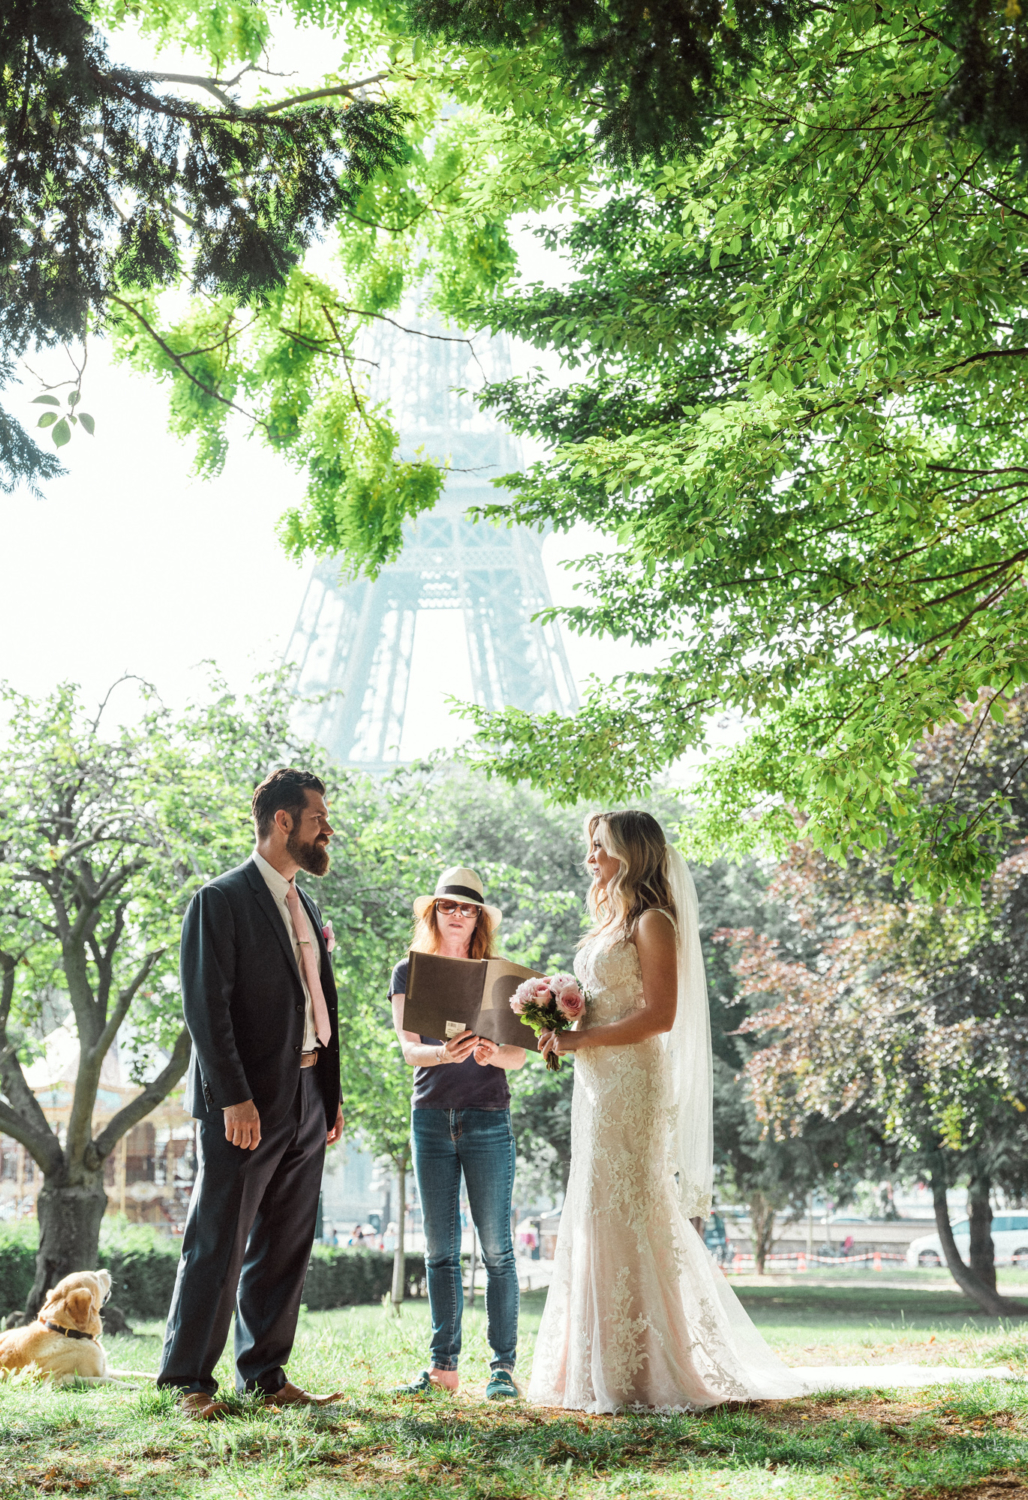 elopement ceremony in paris with dog and view of eiffel tower